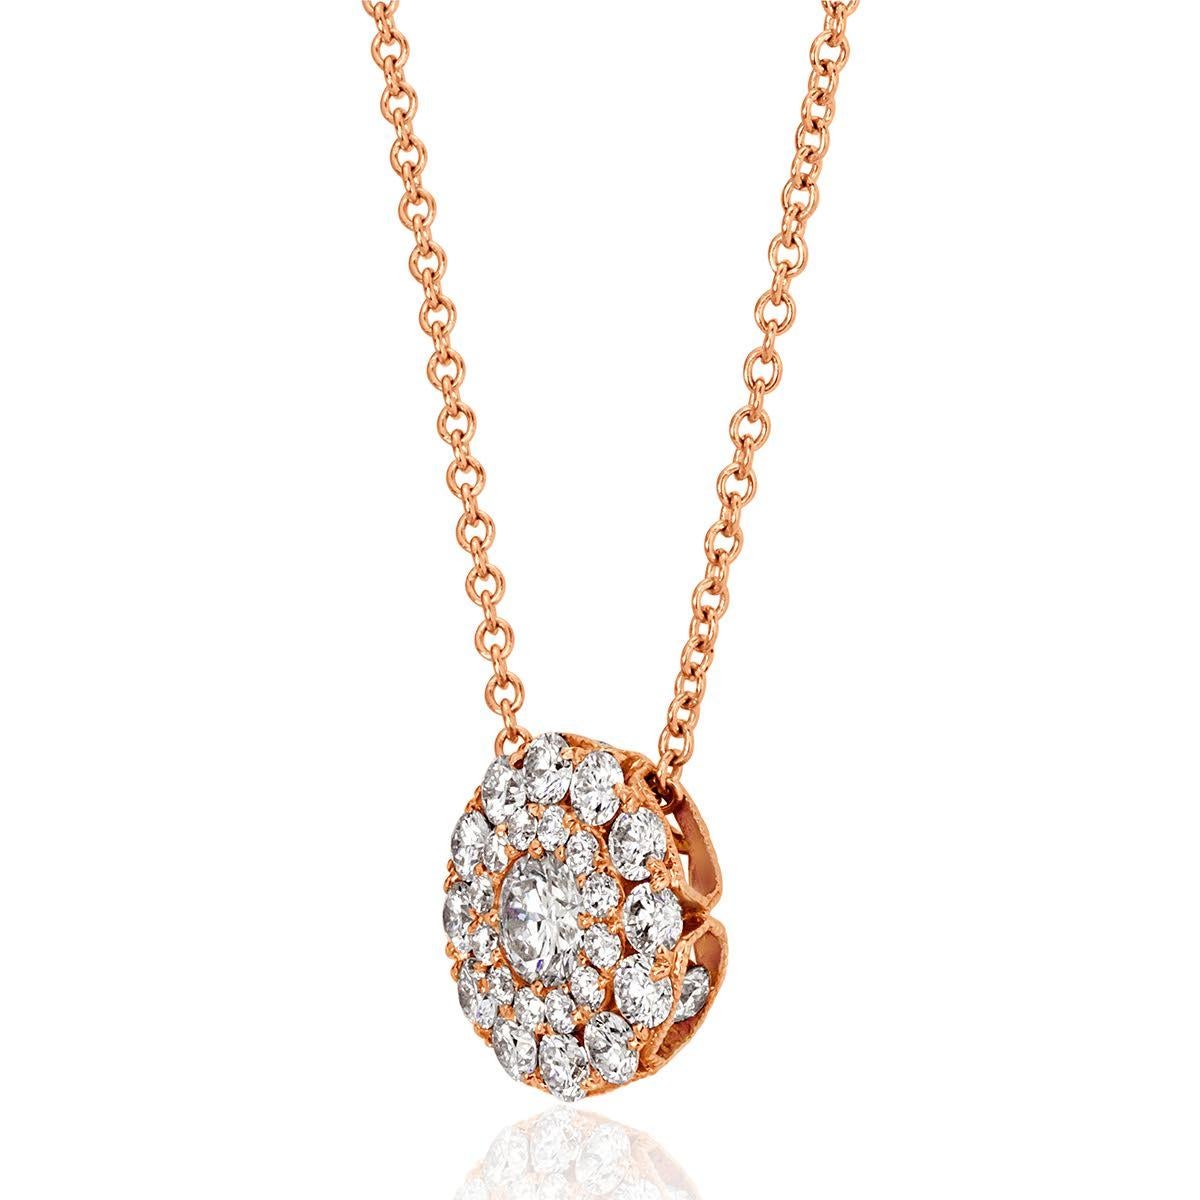 Handcrafted in 14k rose gold, this ravishing diamond pendant features 0.94ct of round brilliant cut diamonds micro pavé set in a graduating halo design. The diamonds are graded at E-F in colors and VS1-VS2 in clarity. Absolutely perfect to wear for